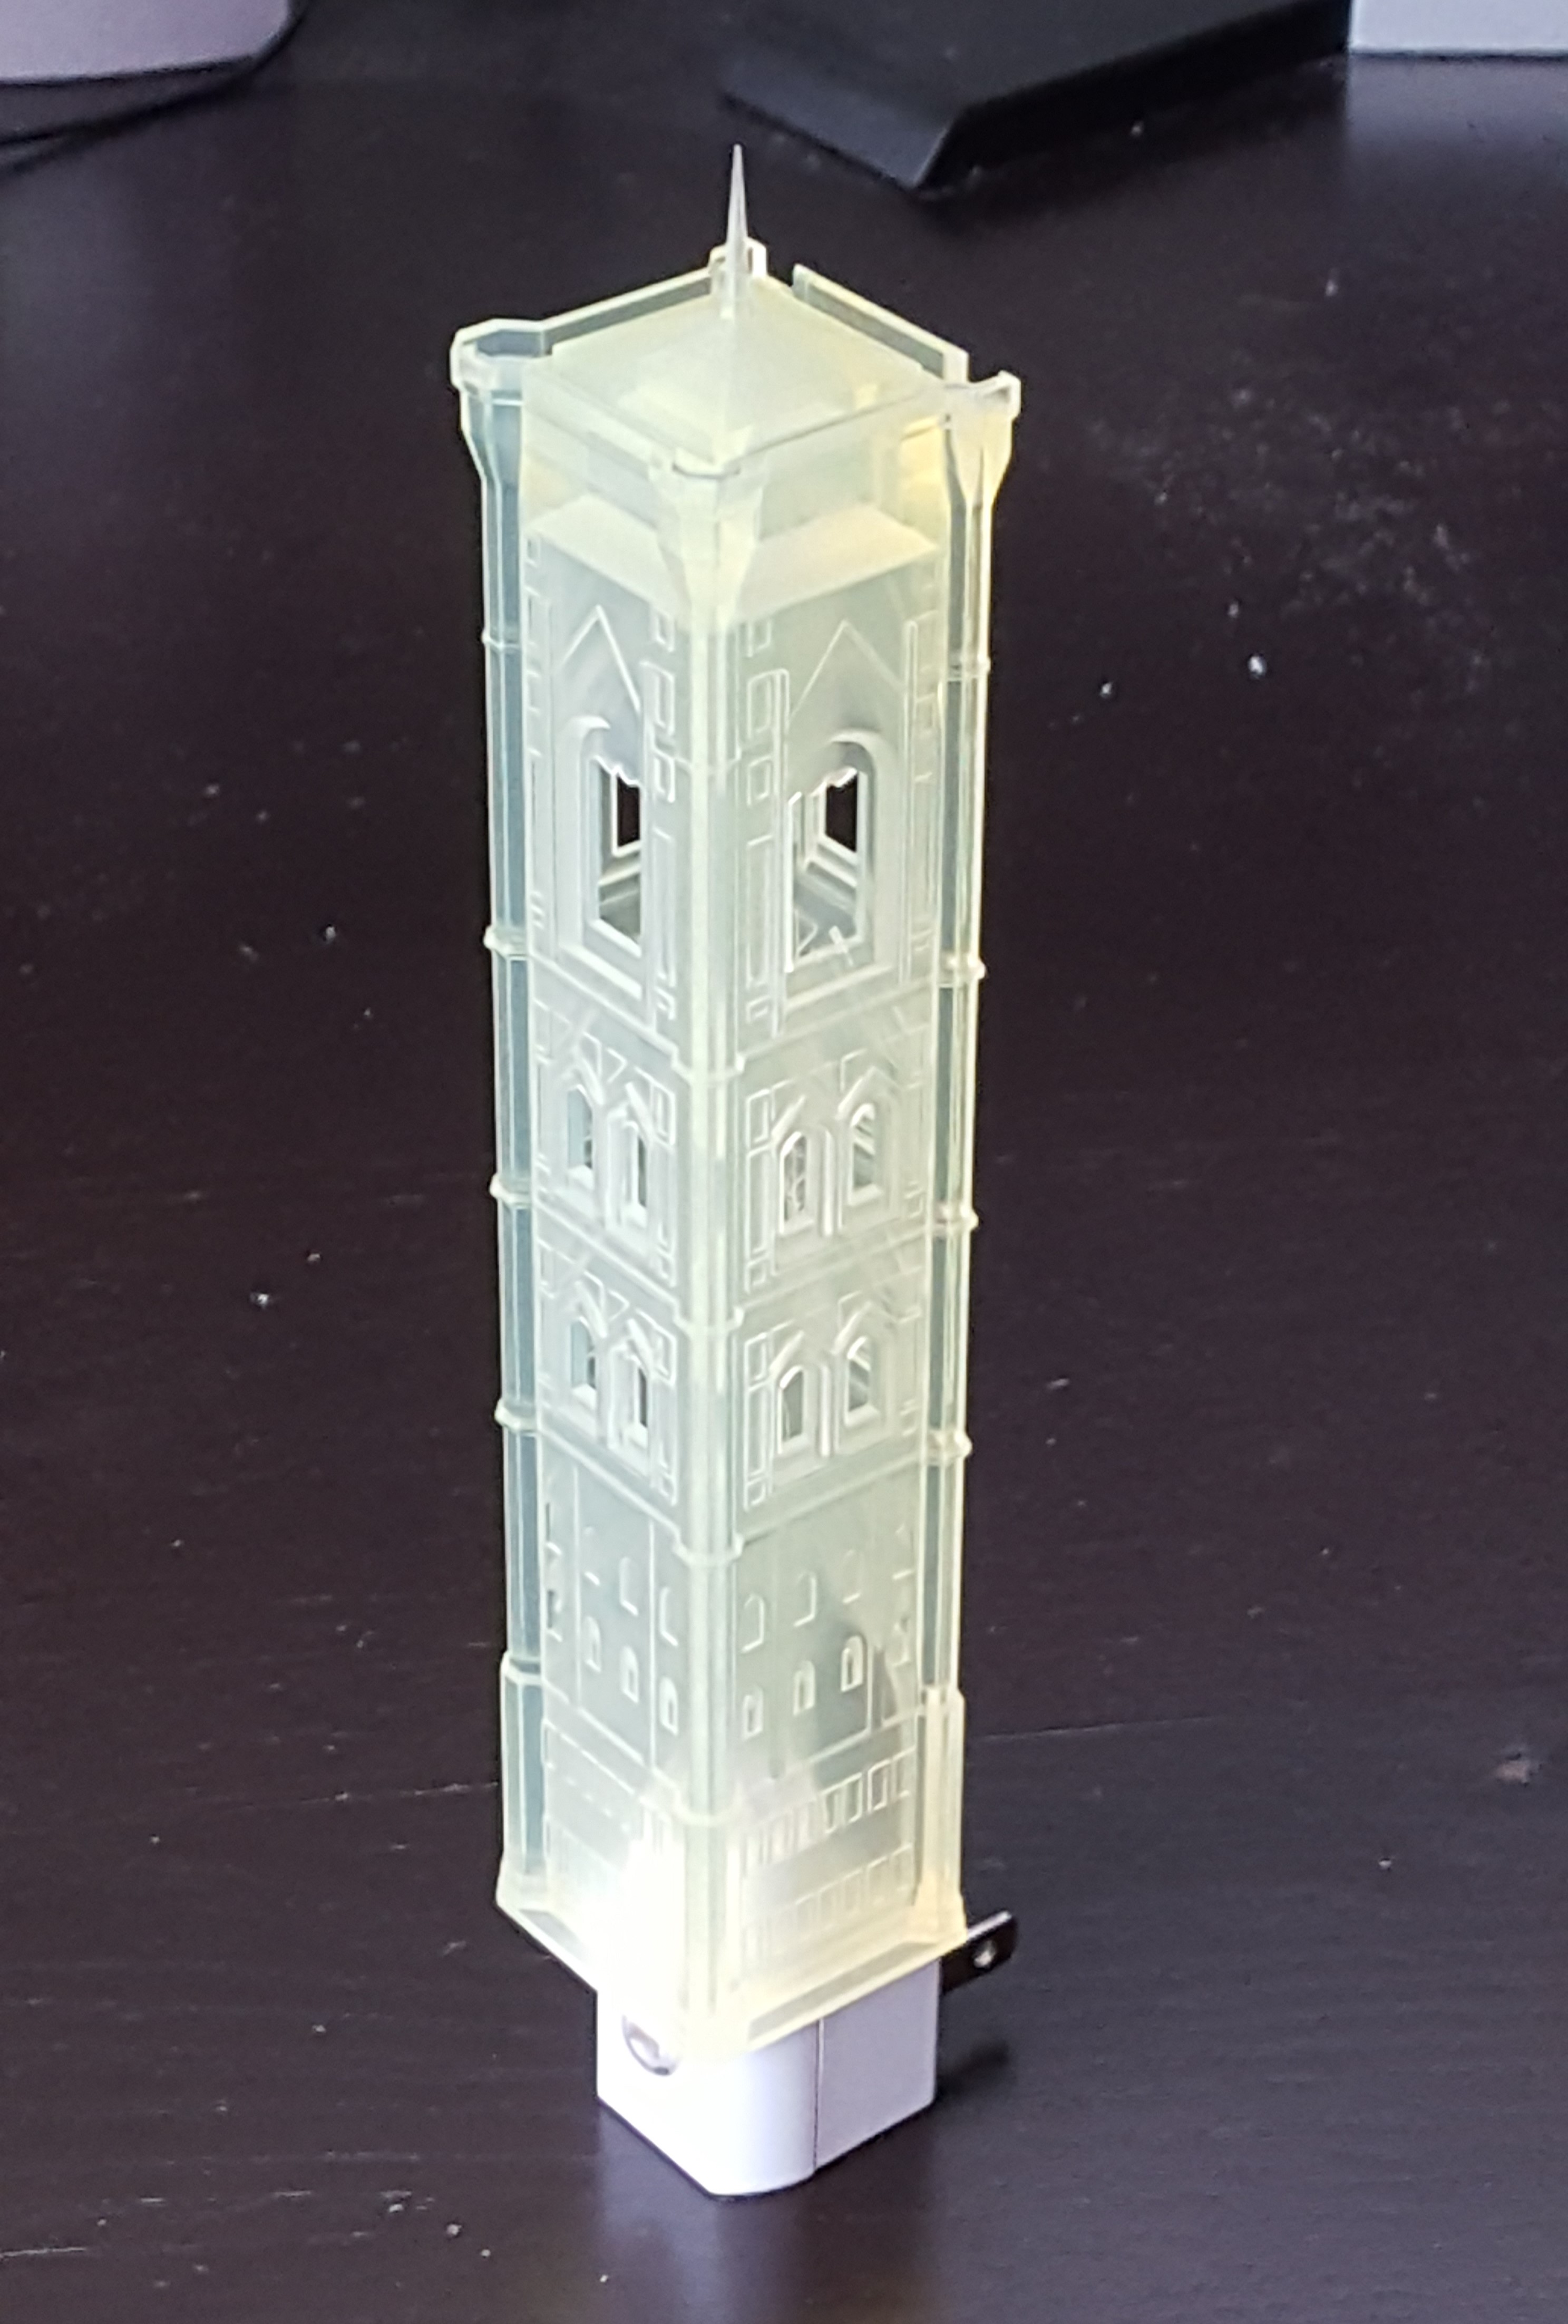 The Campanile model attached to the plugin light